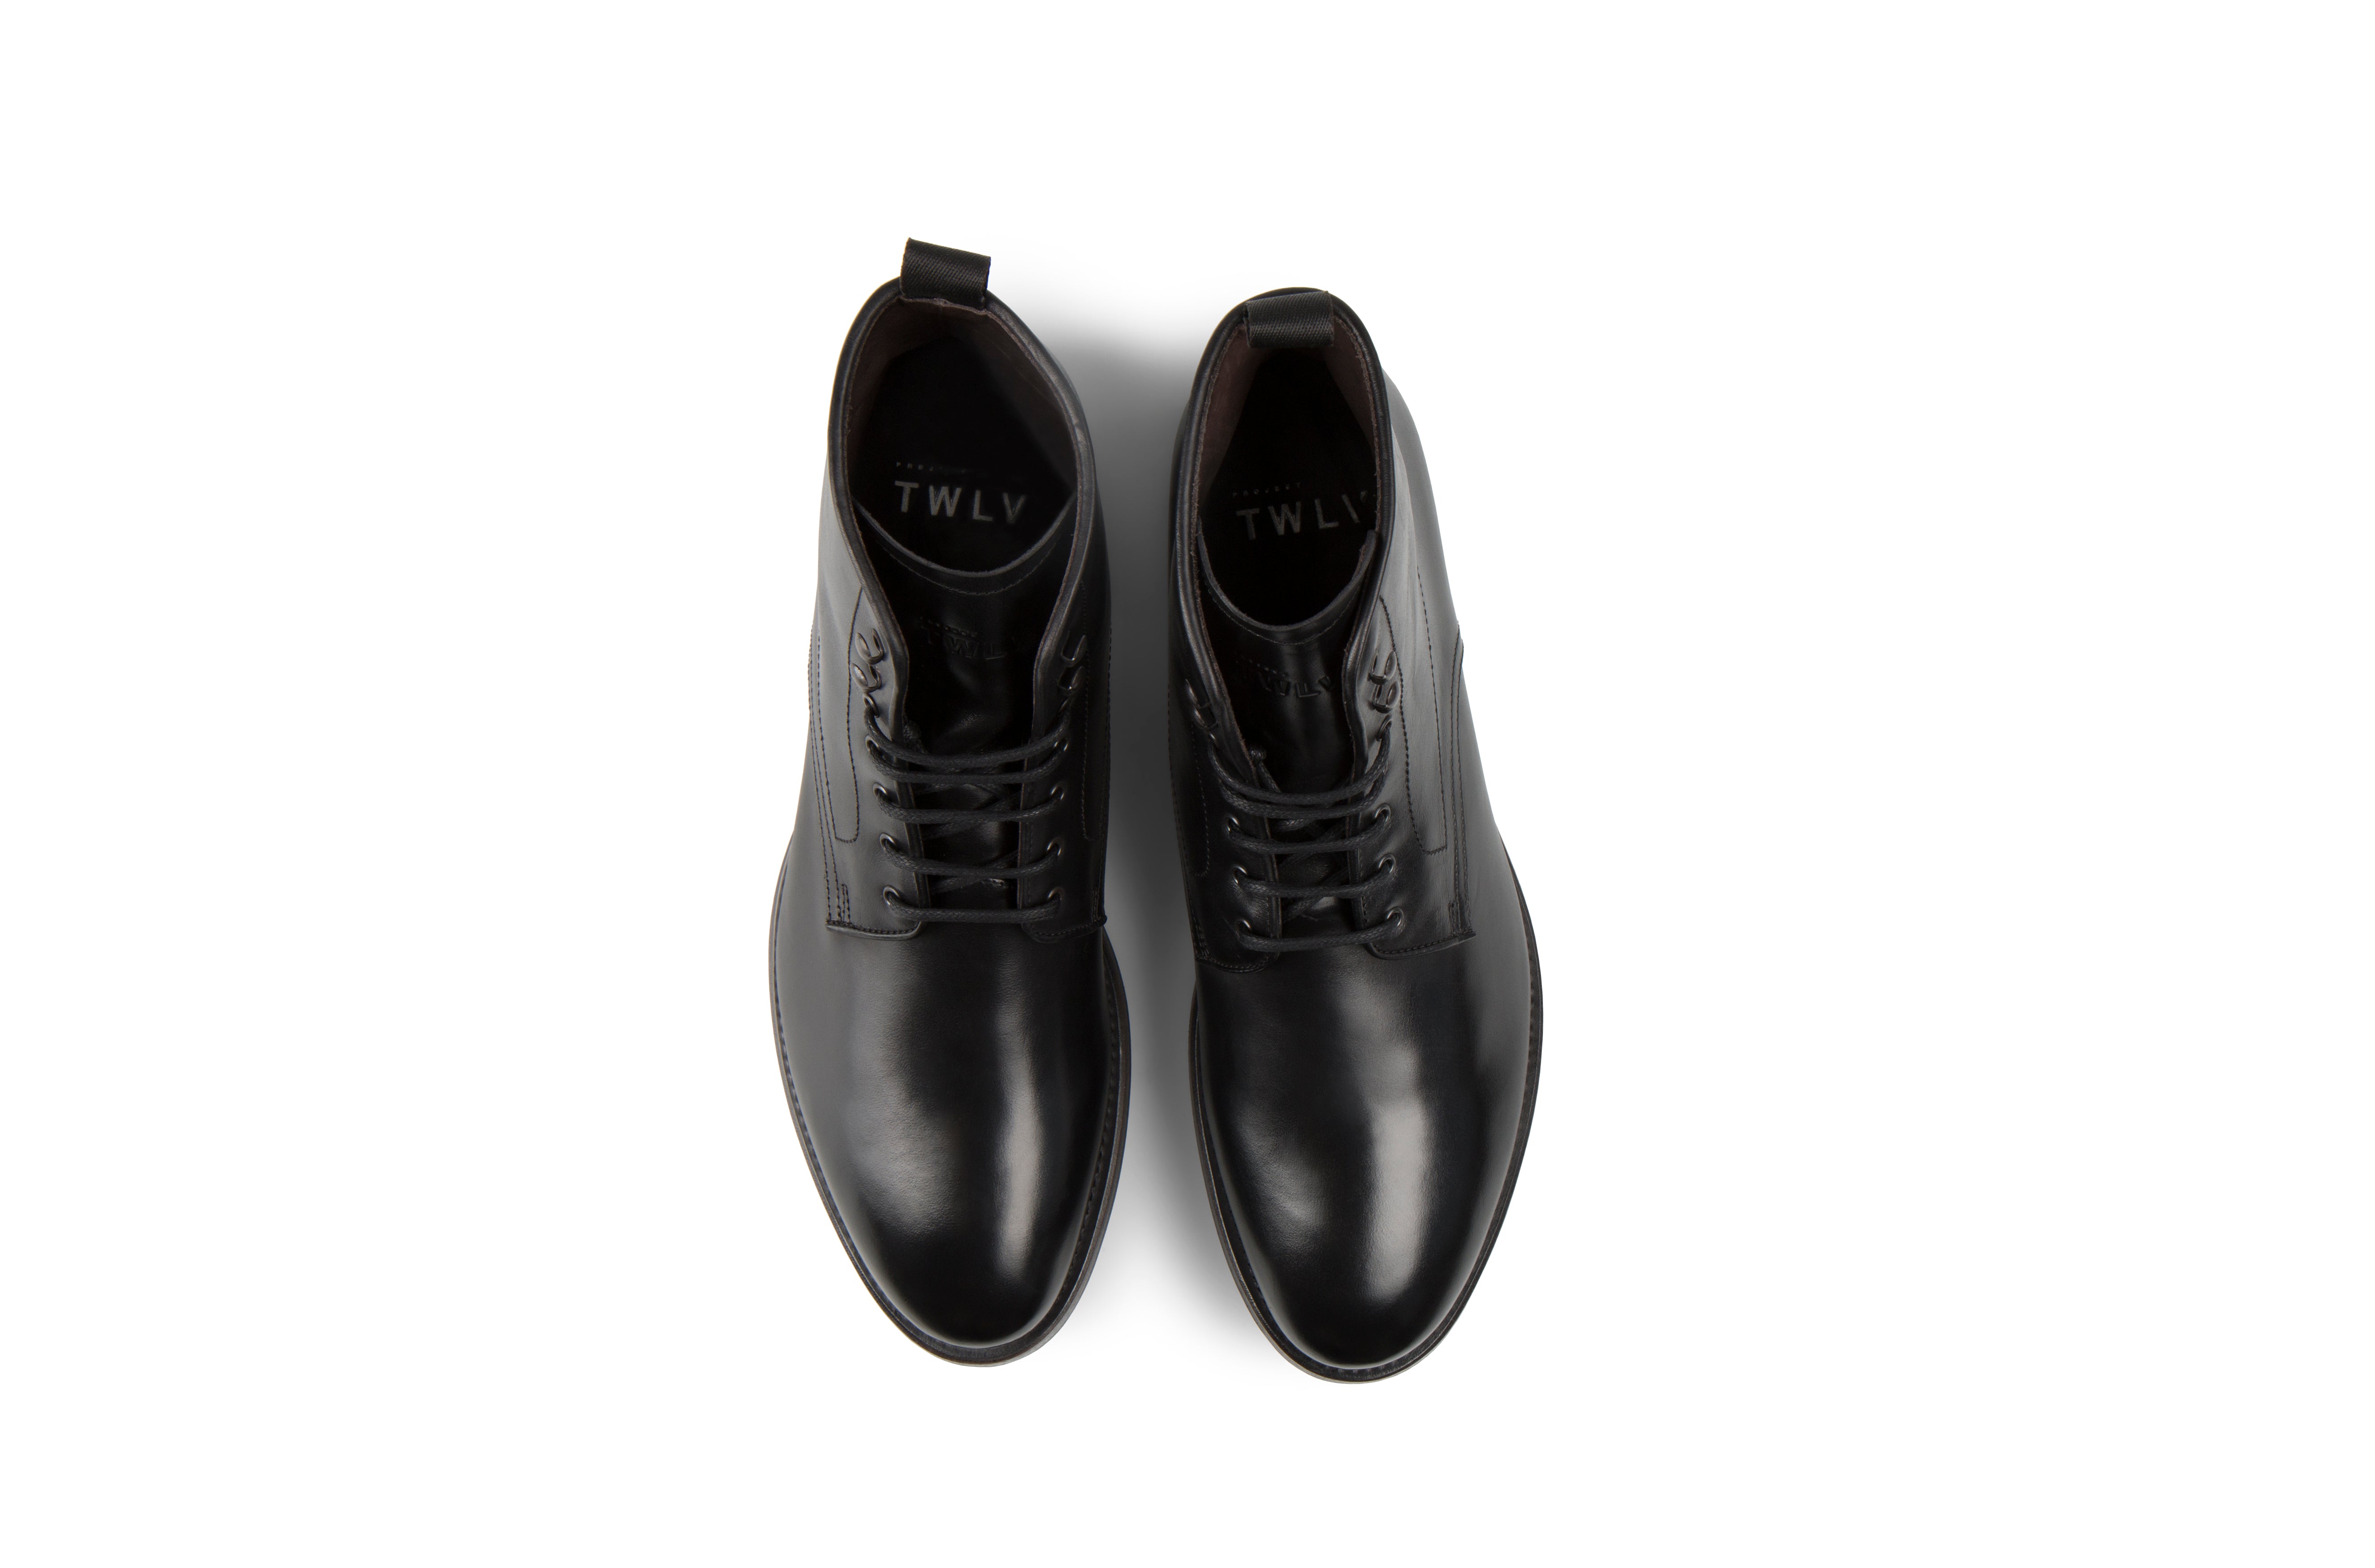 Cult Black Cordovan Leather Balmoral Boots